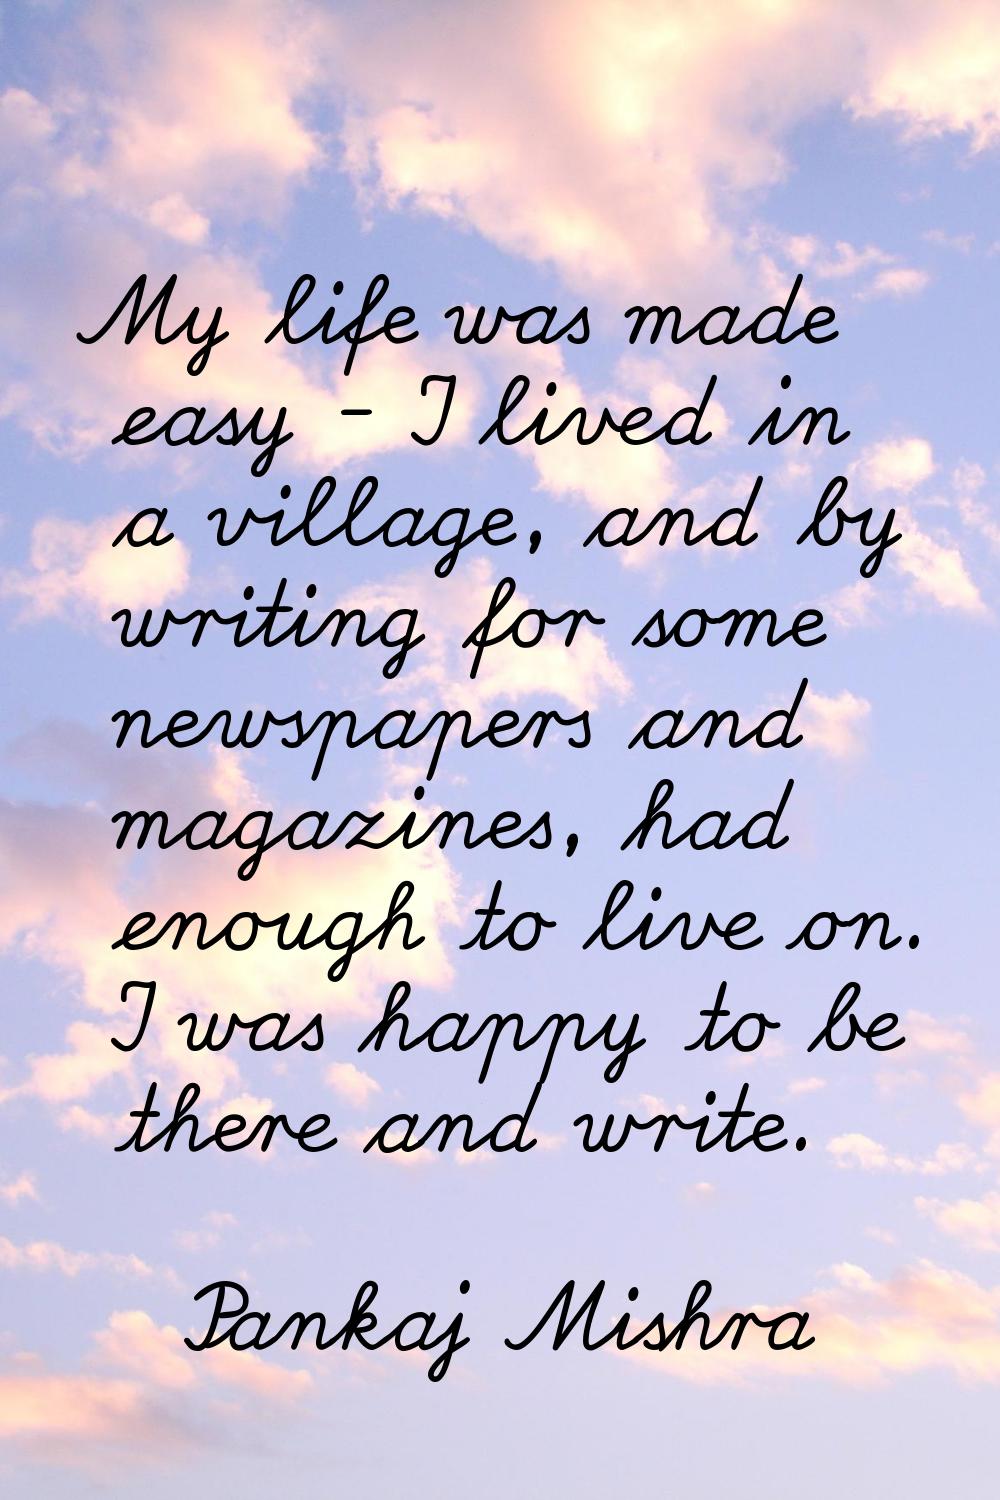 My life was made easy - I lived in a village, and by writing for some newspapers and magazines, had